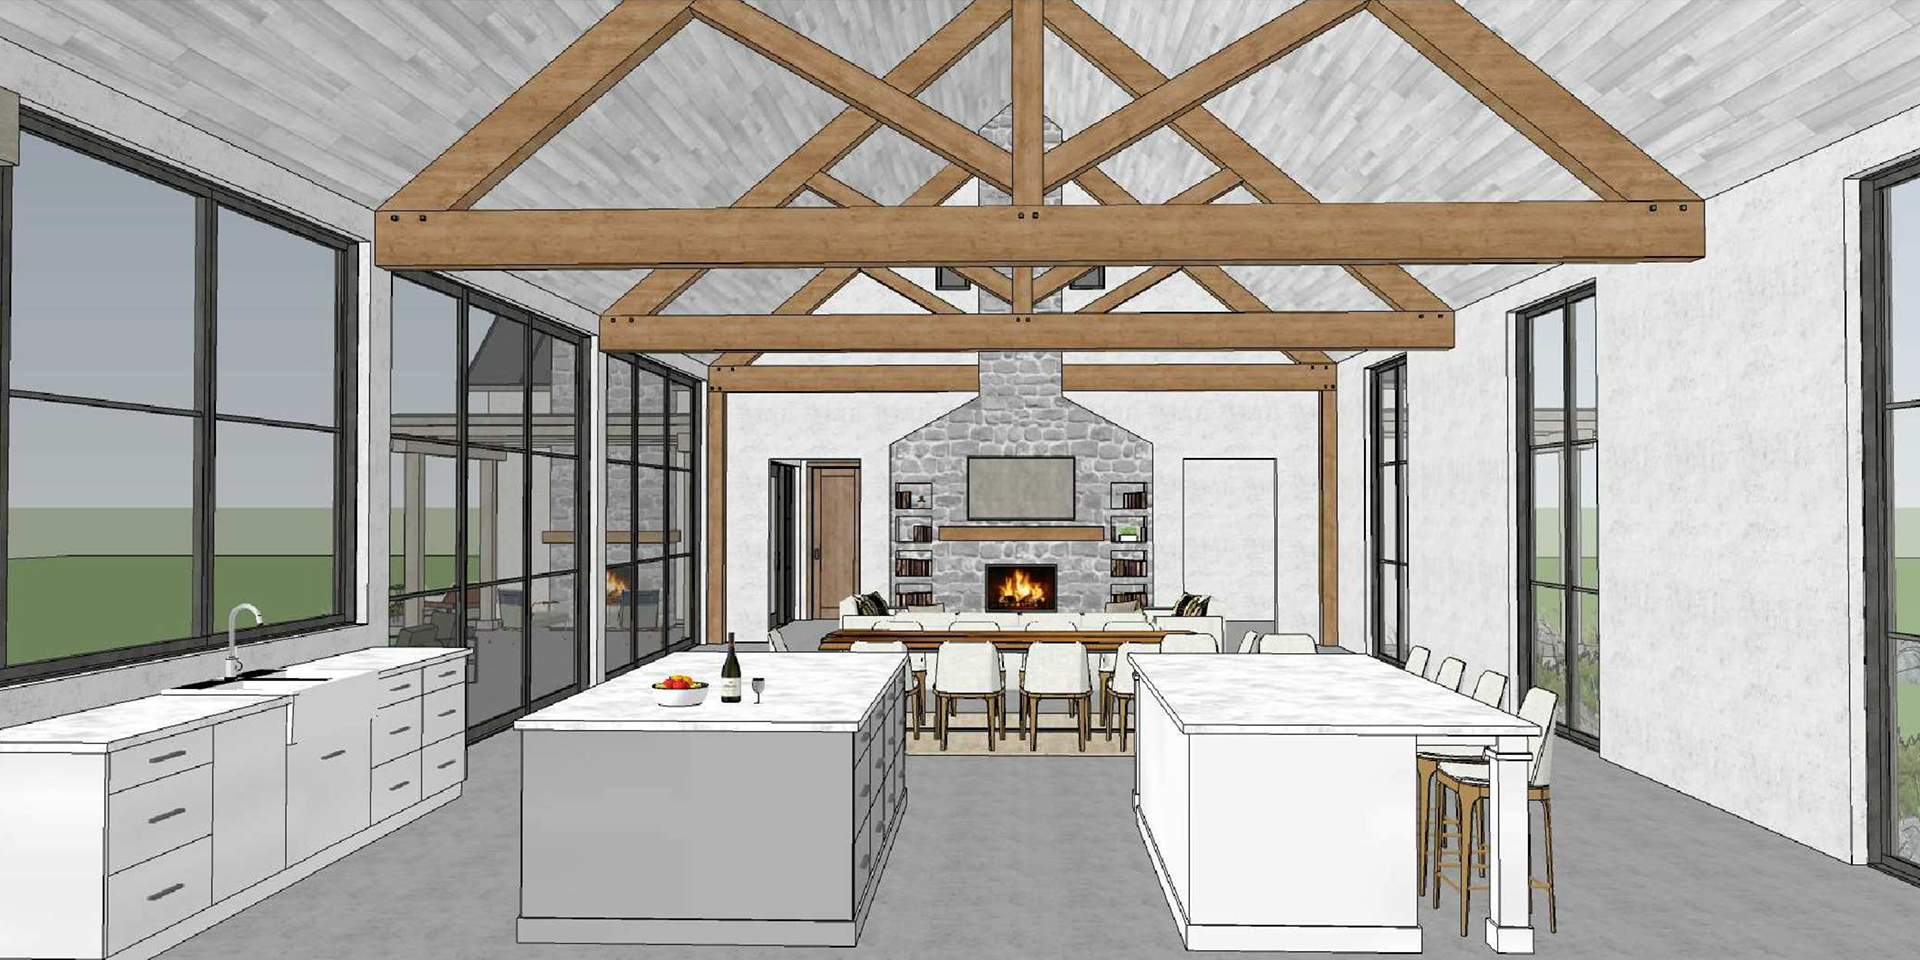 Interior of a modern farm house design by Purcell